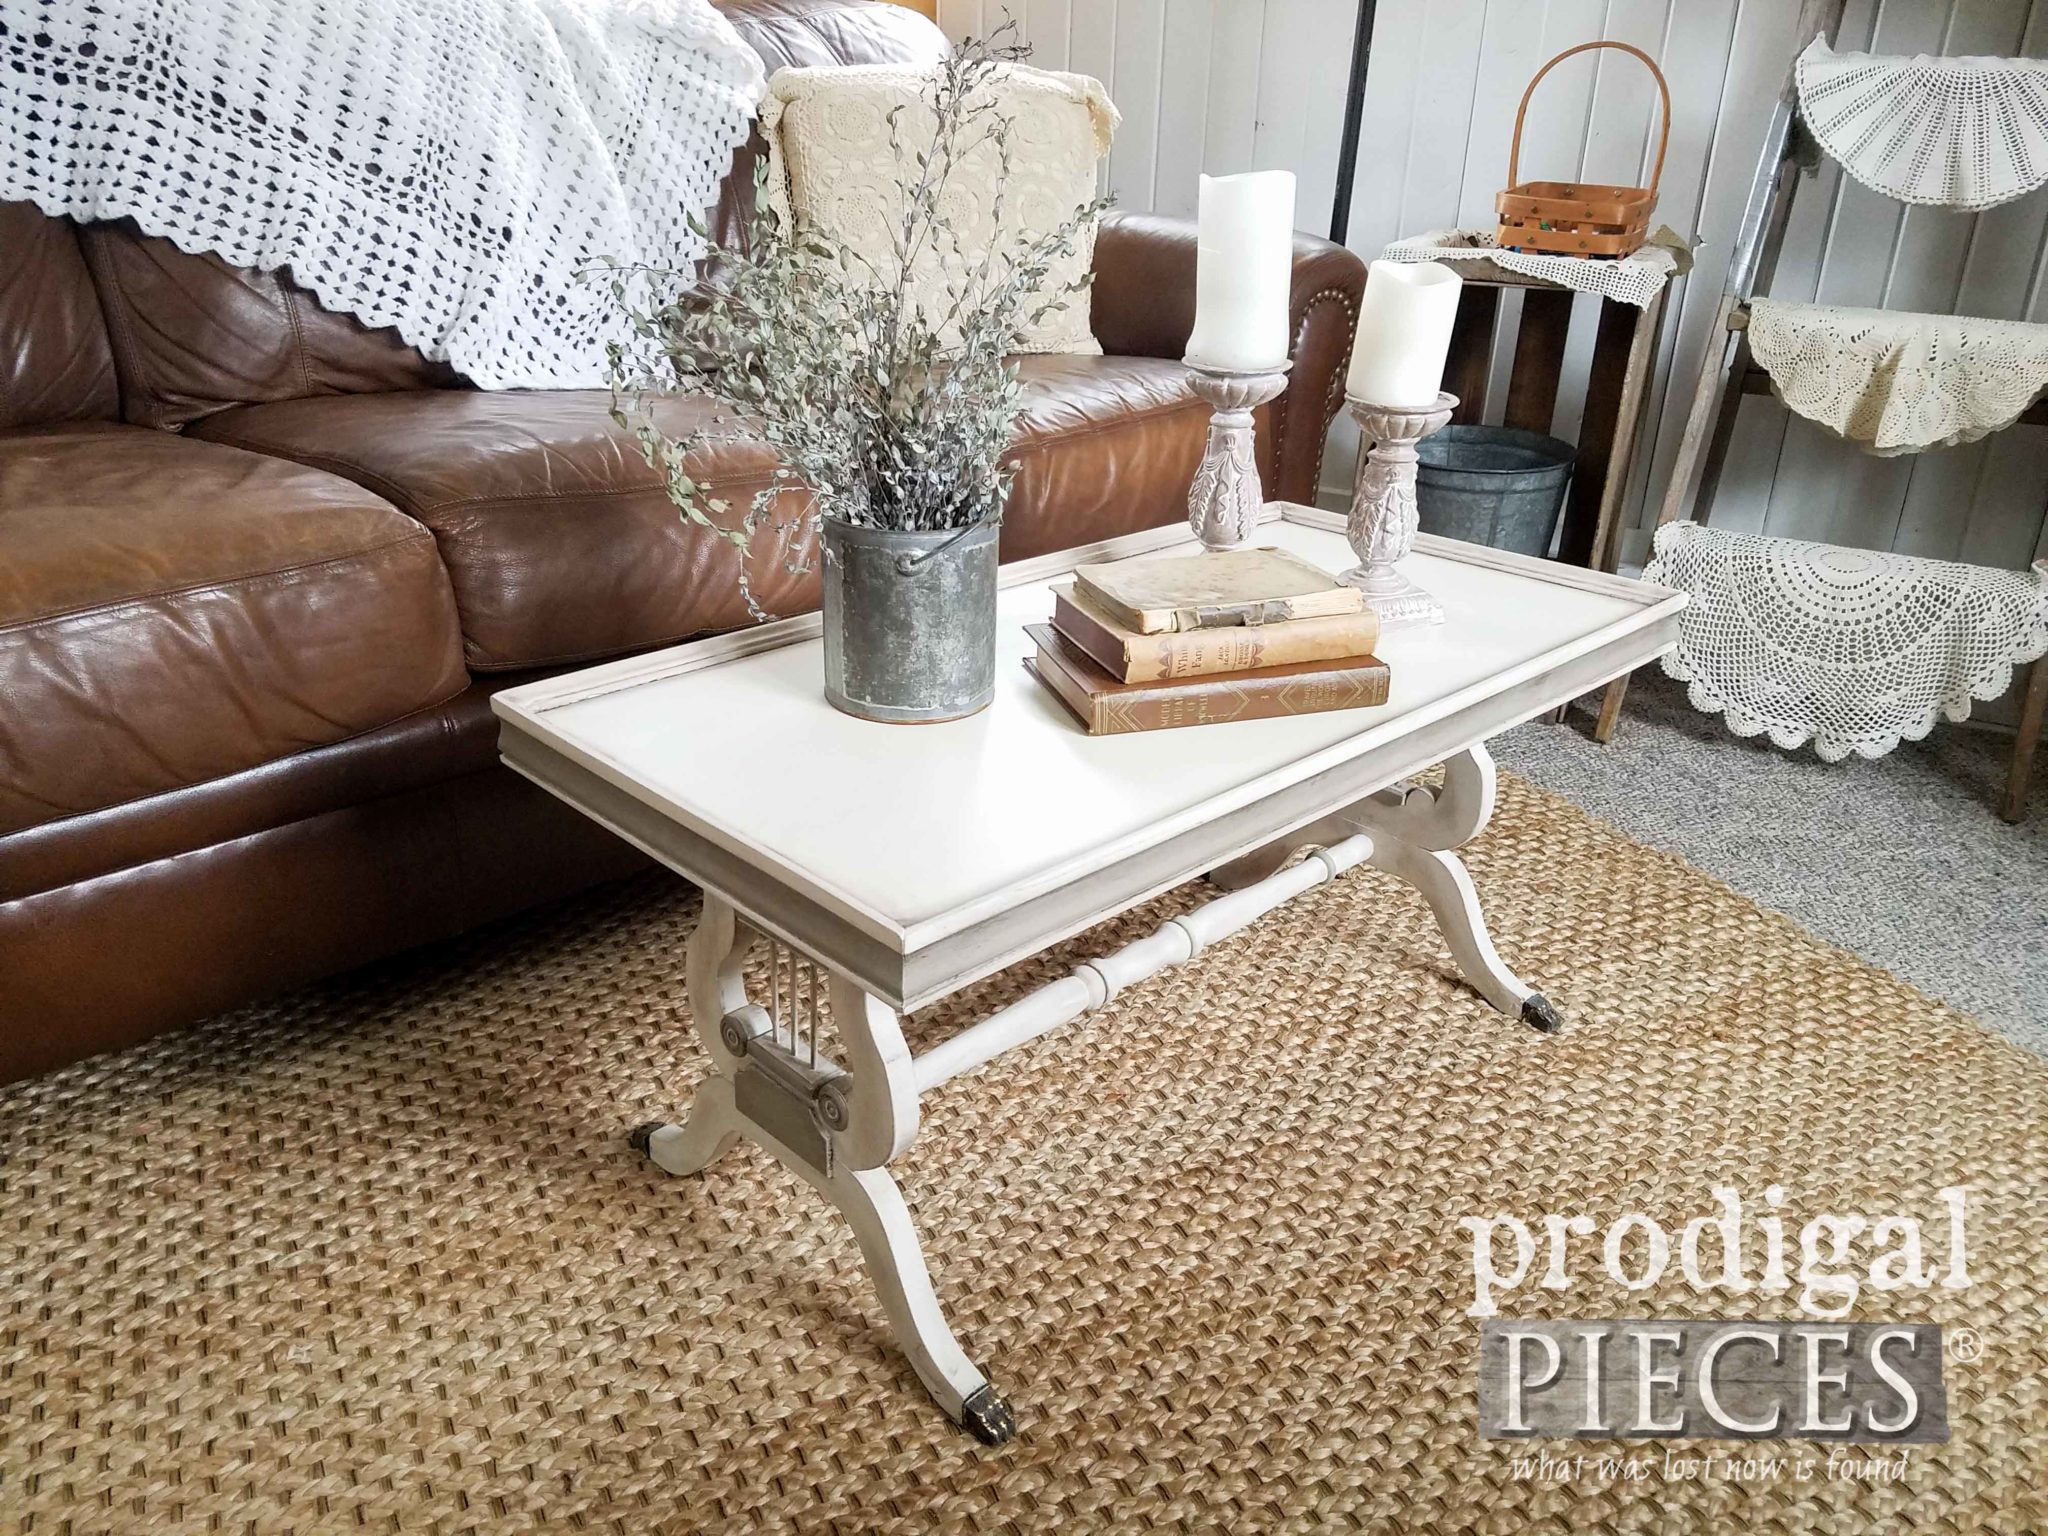 Antique Lyre Coffee Table Restored by Larissa of Prodigal Pieces | prodigalpieces.com